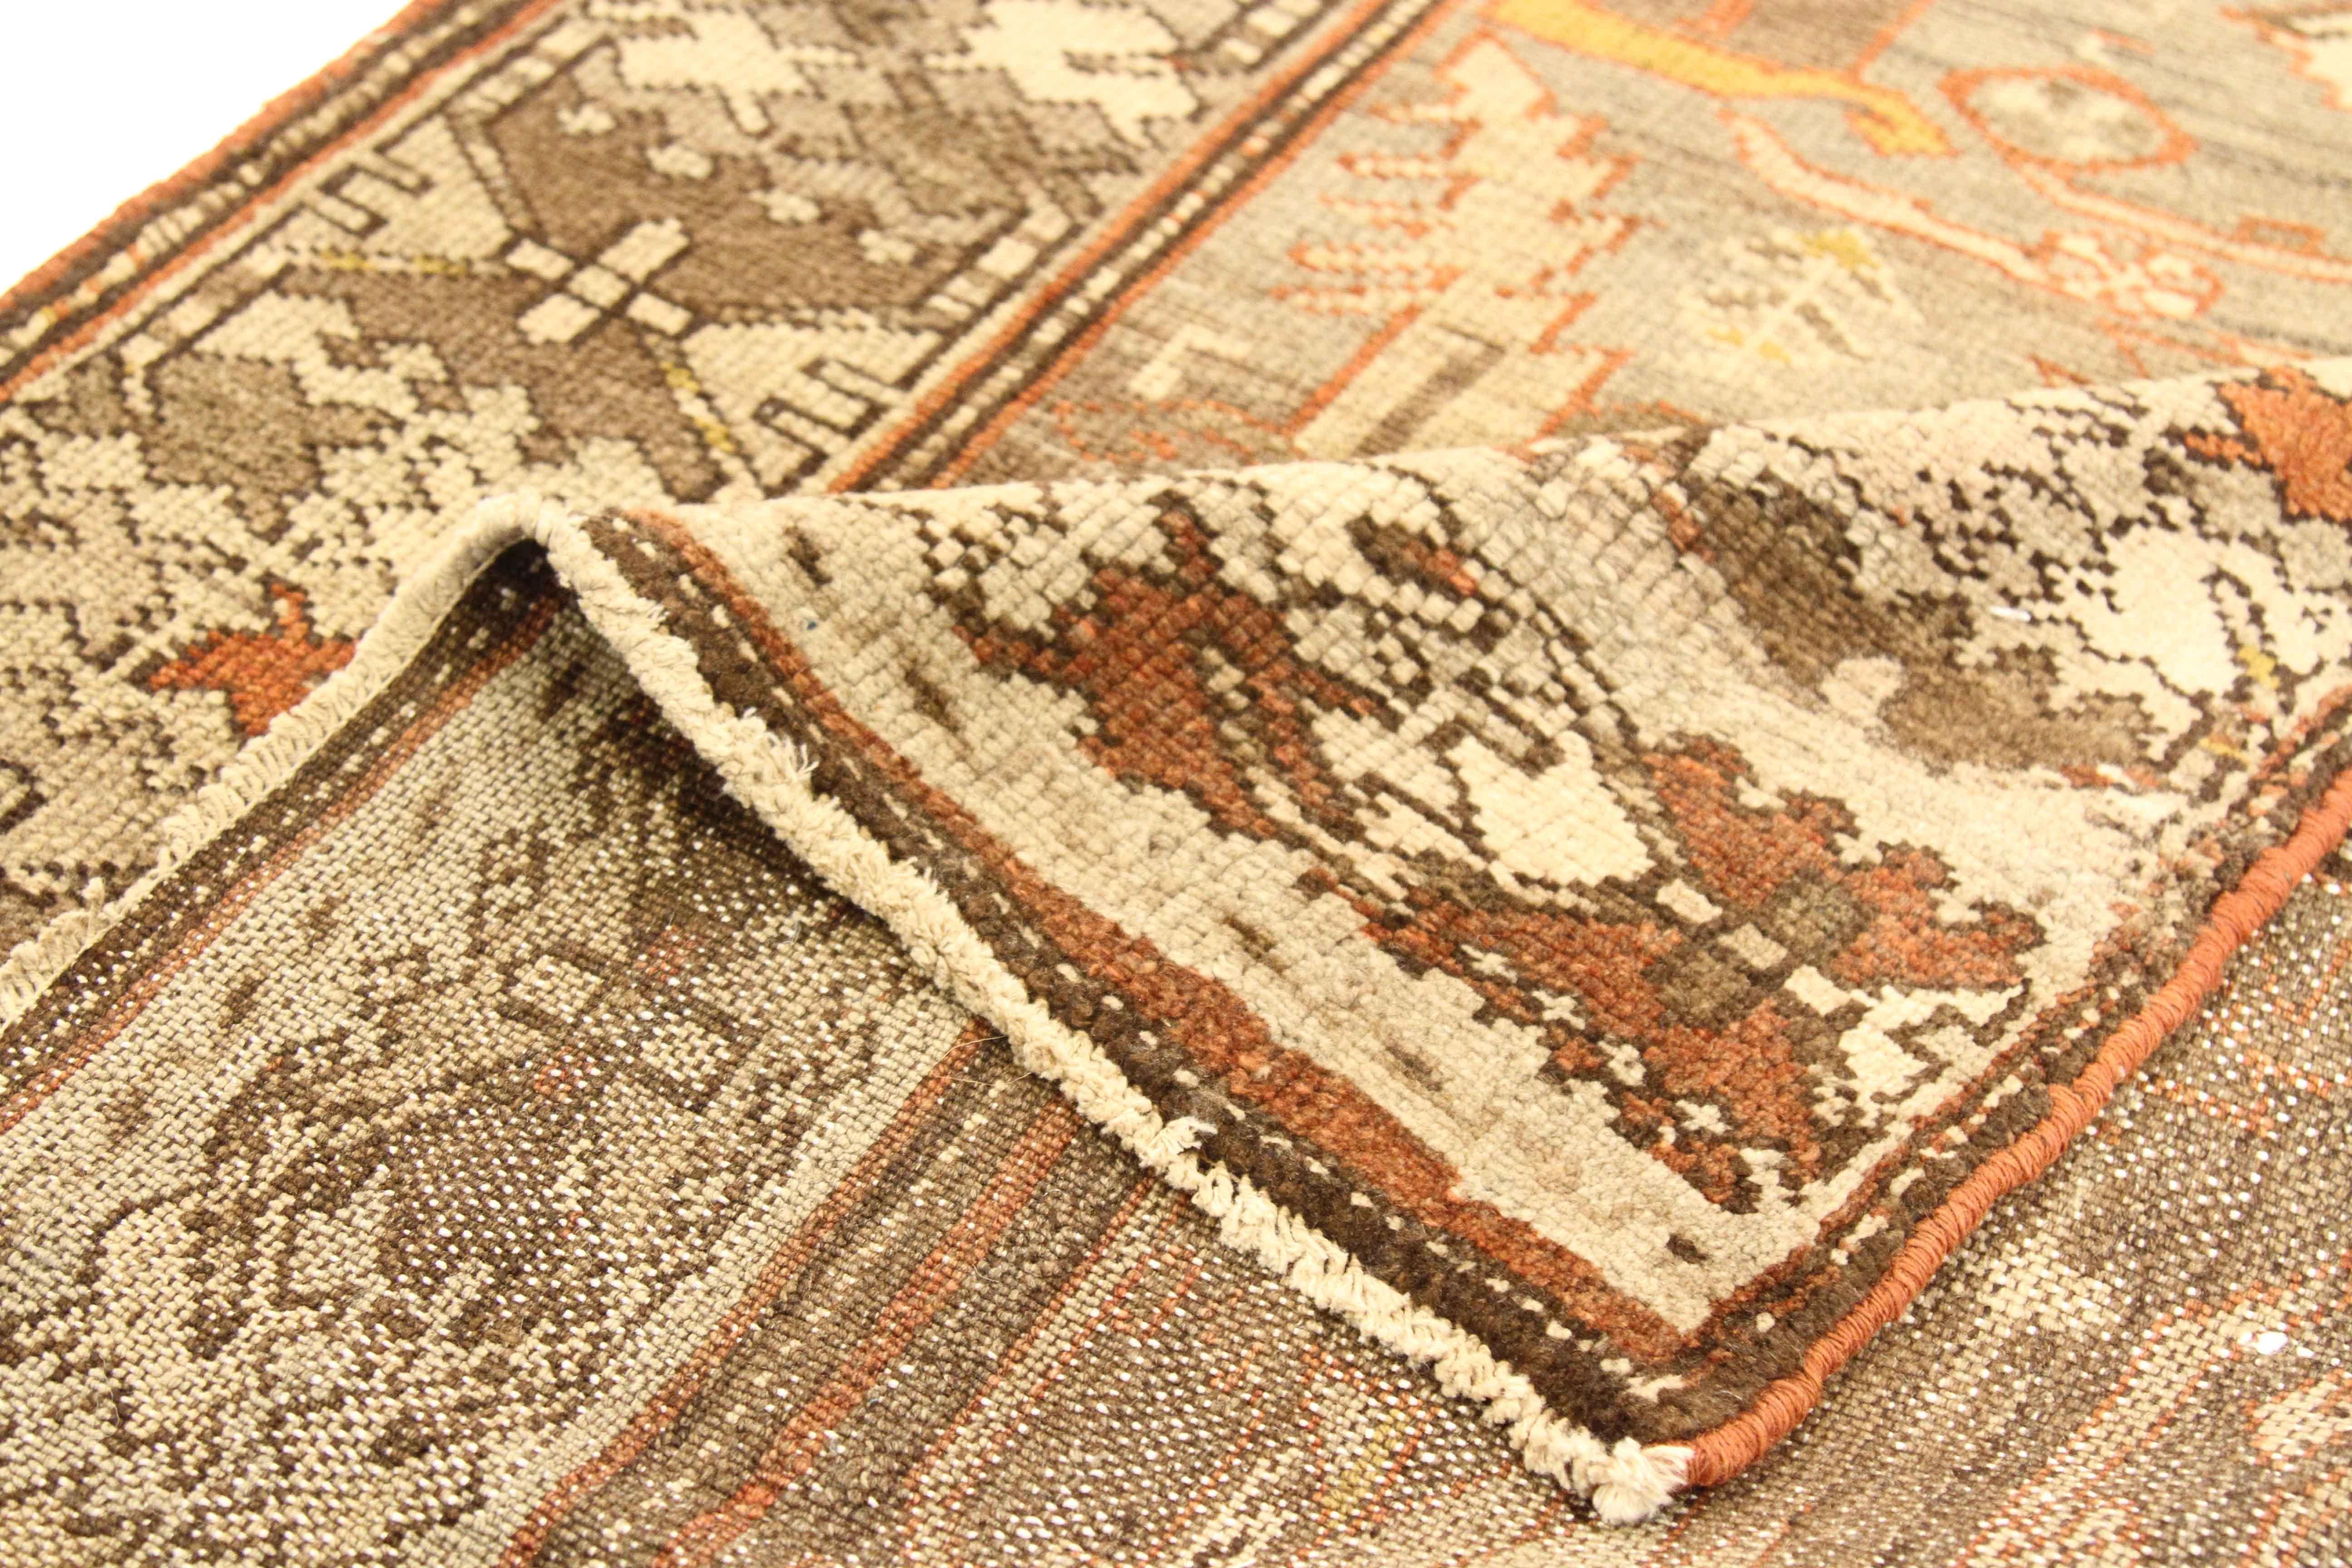 Crafted by hand using the finest wool and vegetable dyes, this antique Persian rug was woven in the 1950s using techniques and designs made famous by Zanjan weavers. It showcases exquisite tribal details cleverly infused with colors of brown, green,